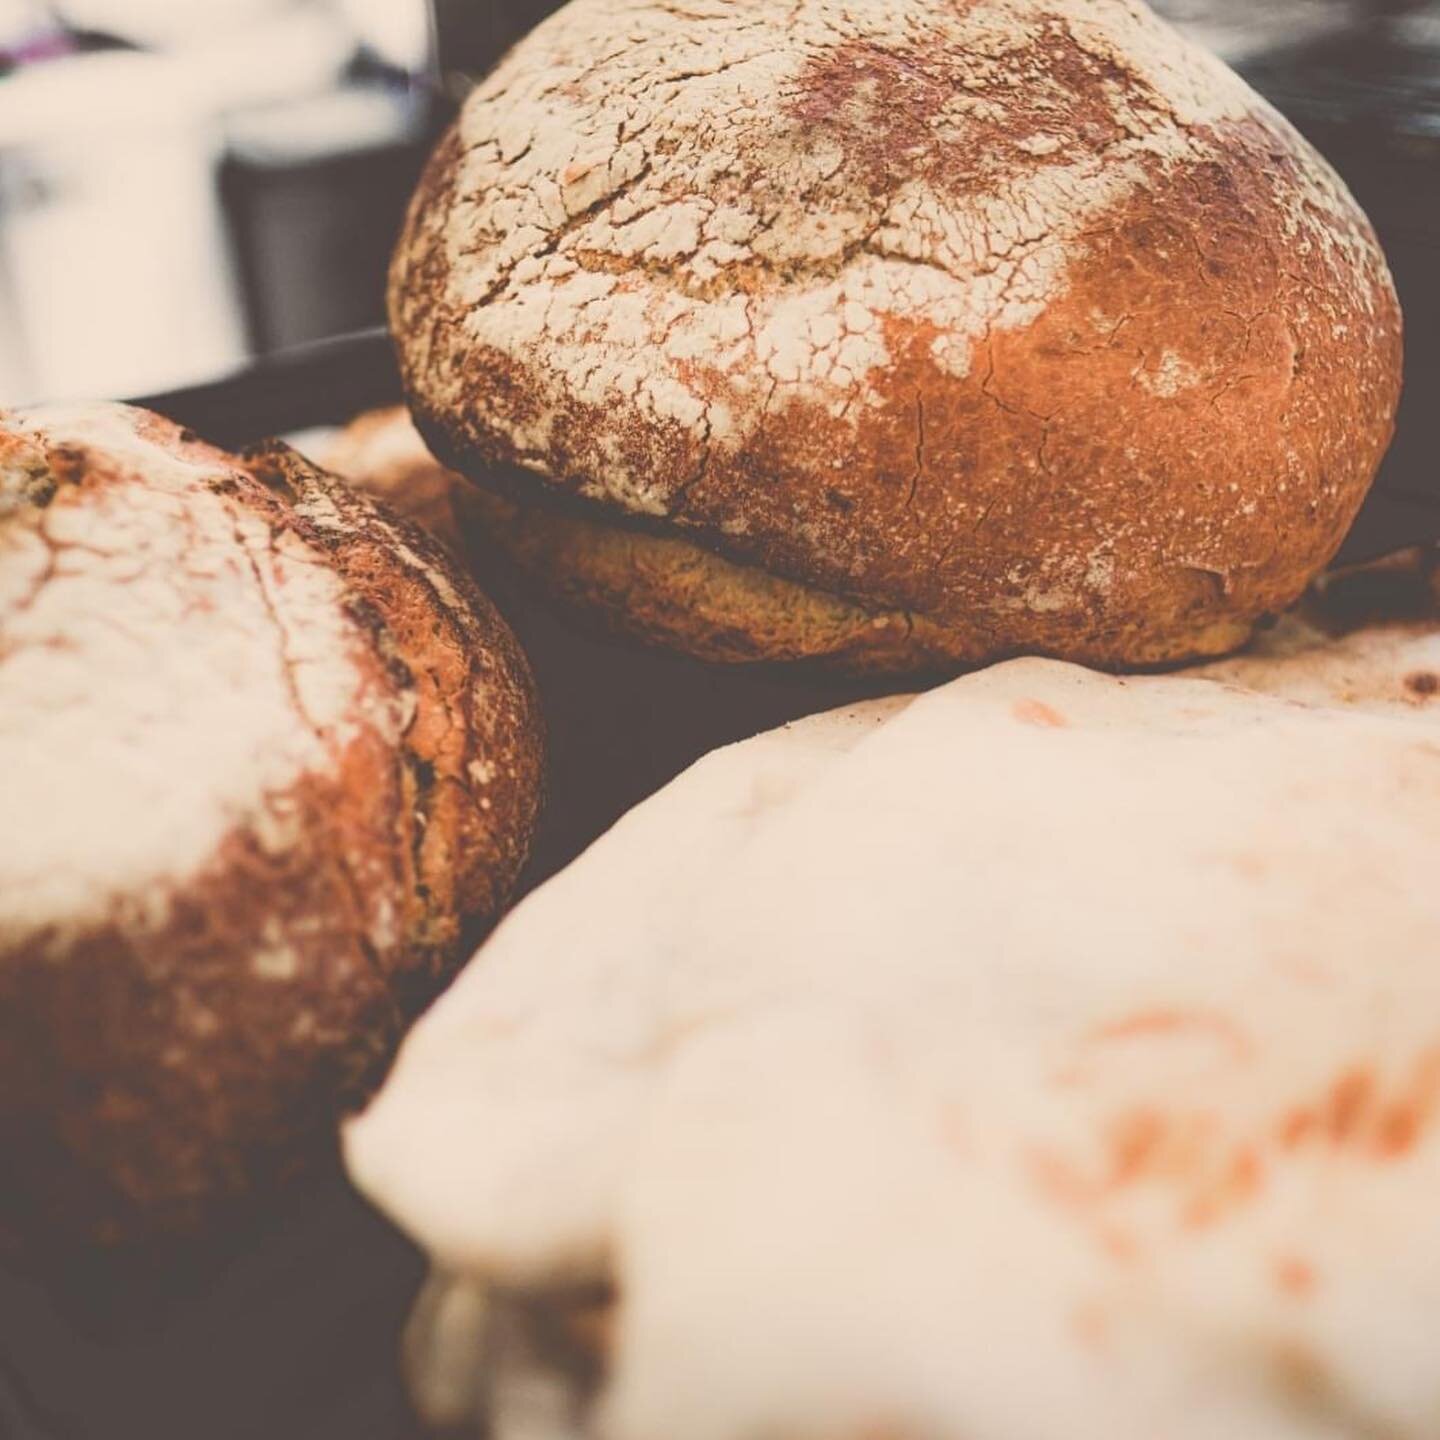 Our delicious, freshly made bread...

There's something about bread and dips you just can't beat.

Our menu includes... 
🌿 Hummus
🌿 Red Pepper &amp; Feta 
🌿 Avocado Crema 
🌿 Goats Cheese Mousse 
🌿 Black Olive Tapenade 

Plus different snacks inc